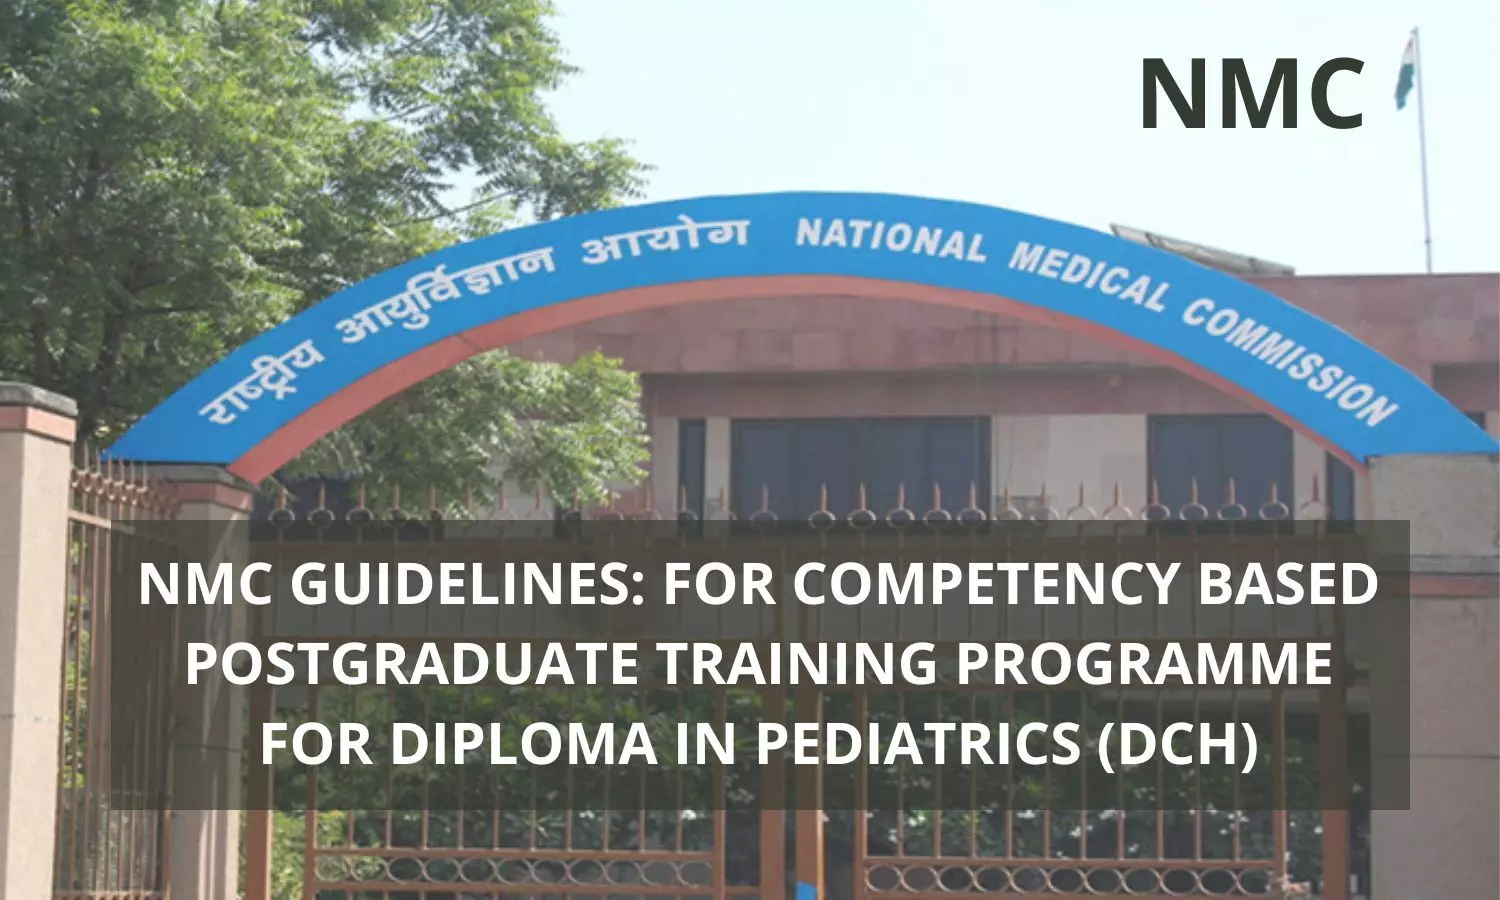 NMC Guidelines For Competency Based Training Programme For PG Diploma In Pediatrics (DCH)